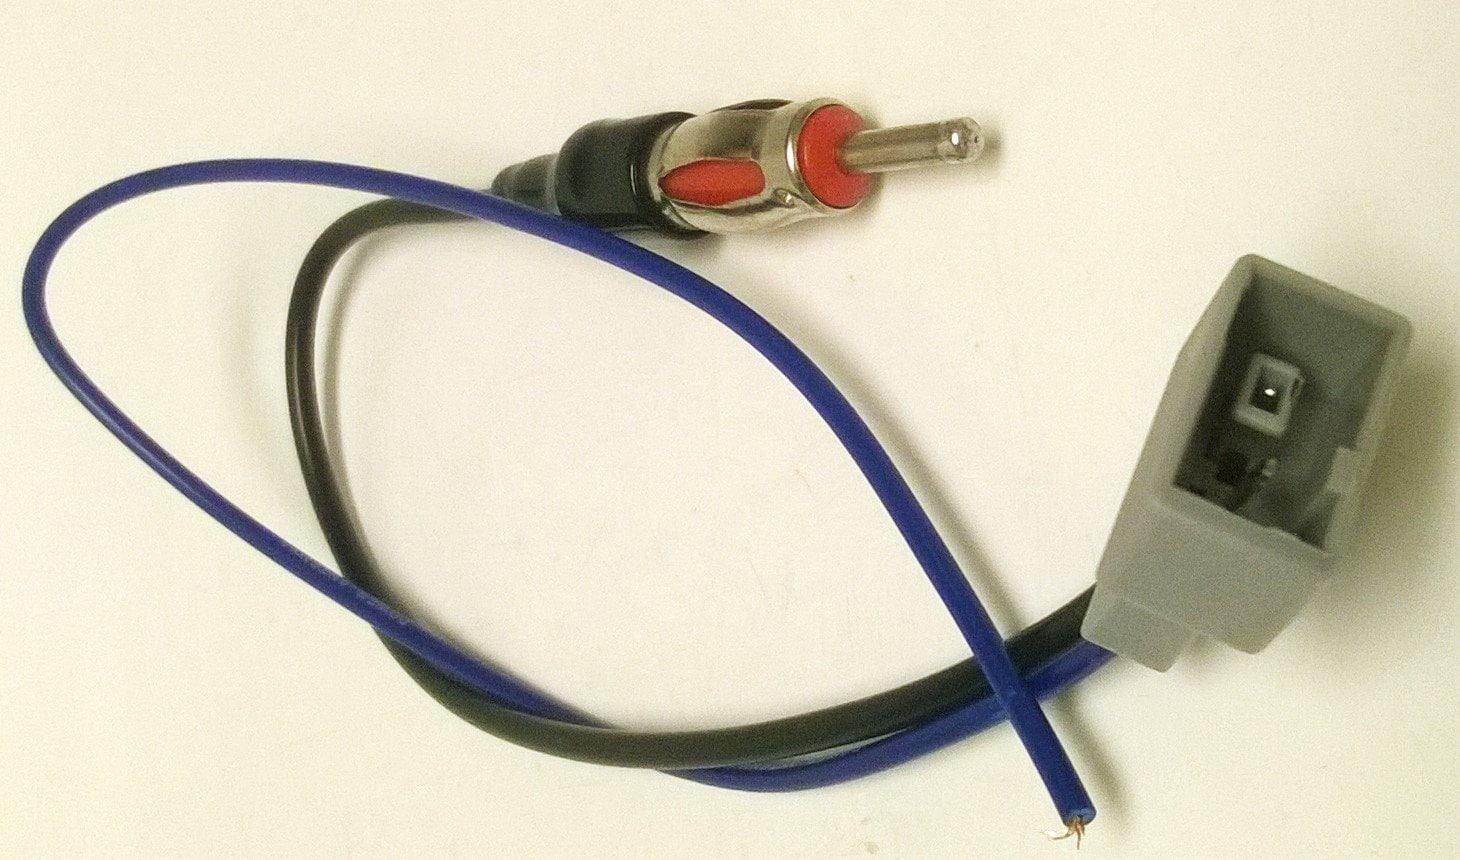 Stereo Antenna Harness Adapter for Installing a New Radio